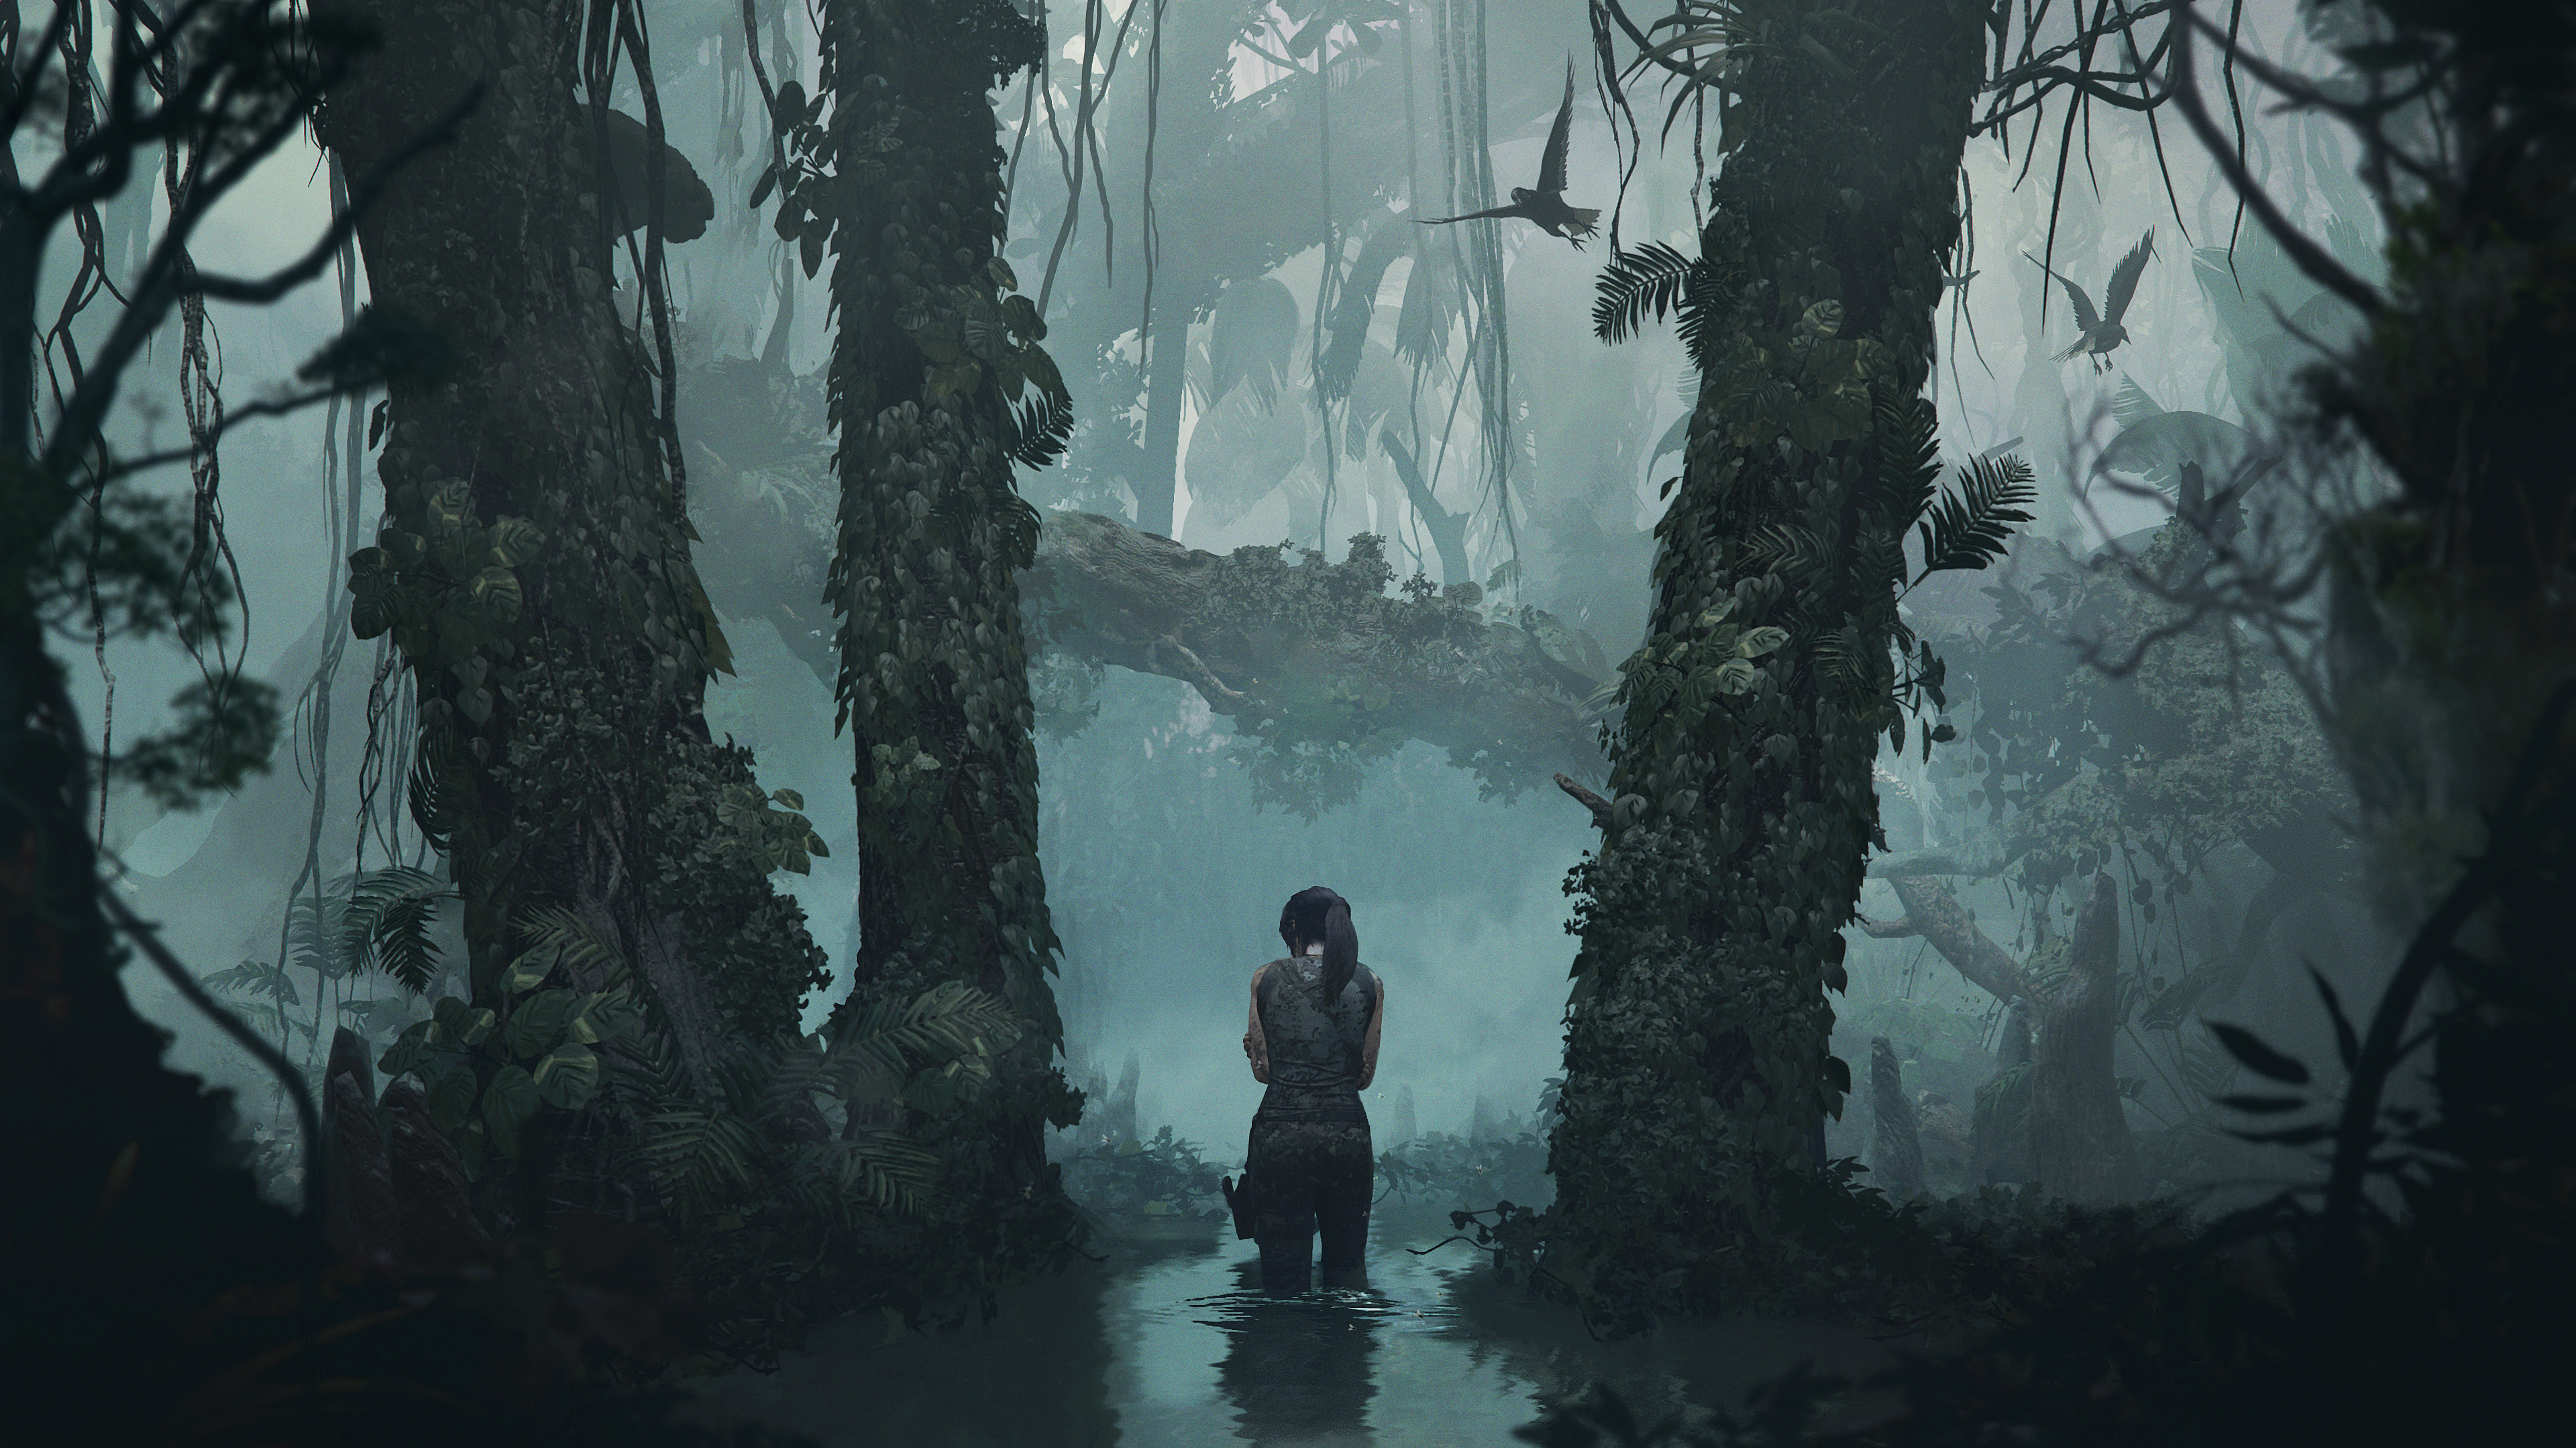 download 3840x2160 wallpaper shadow of the tomb raider on shadow of the tomb raider desktop wallpapers